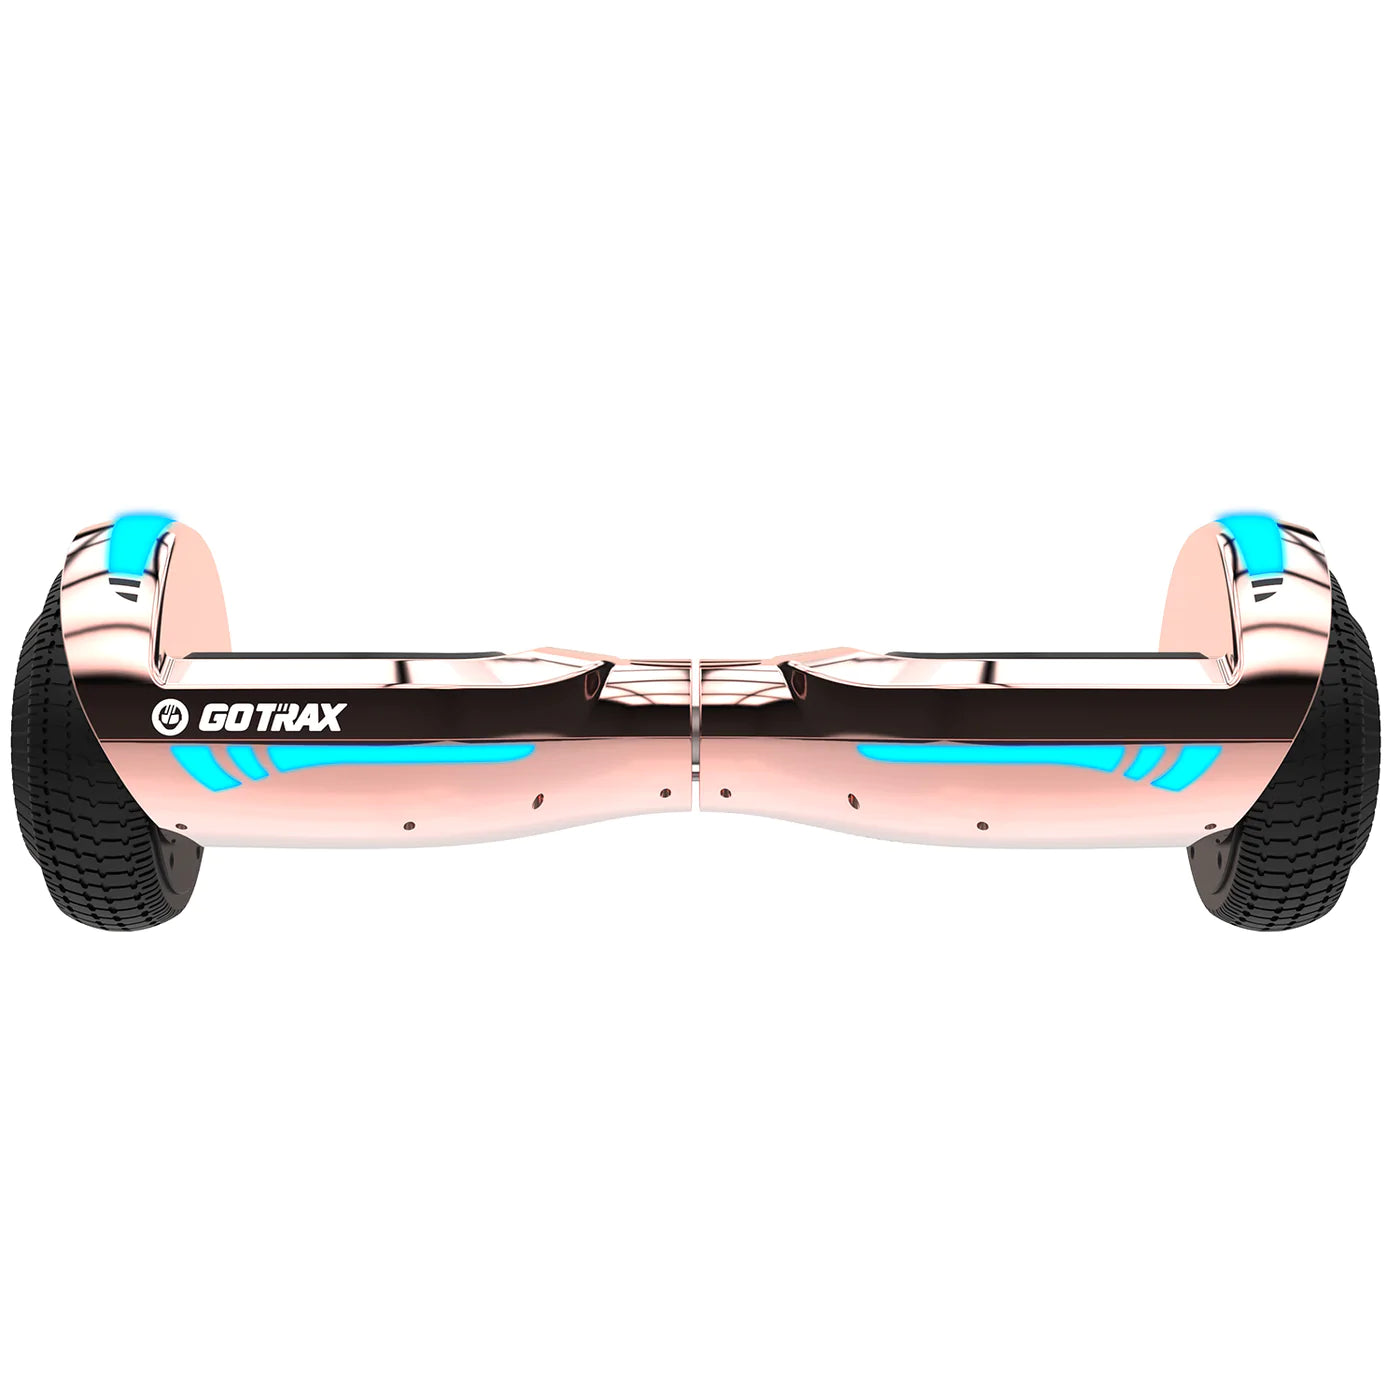 Rose Gold Glide Chrome Bluetooth Hoverboard 6.5